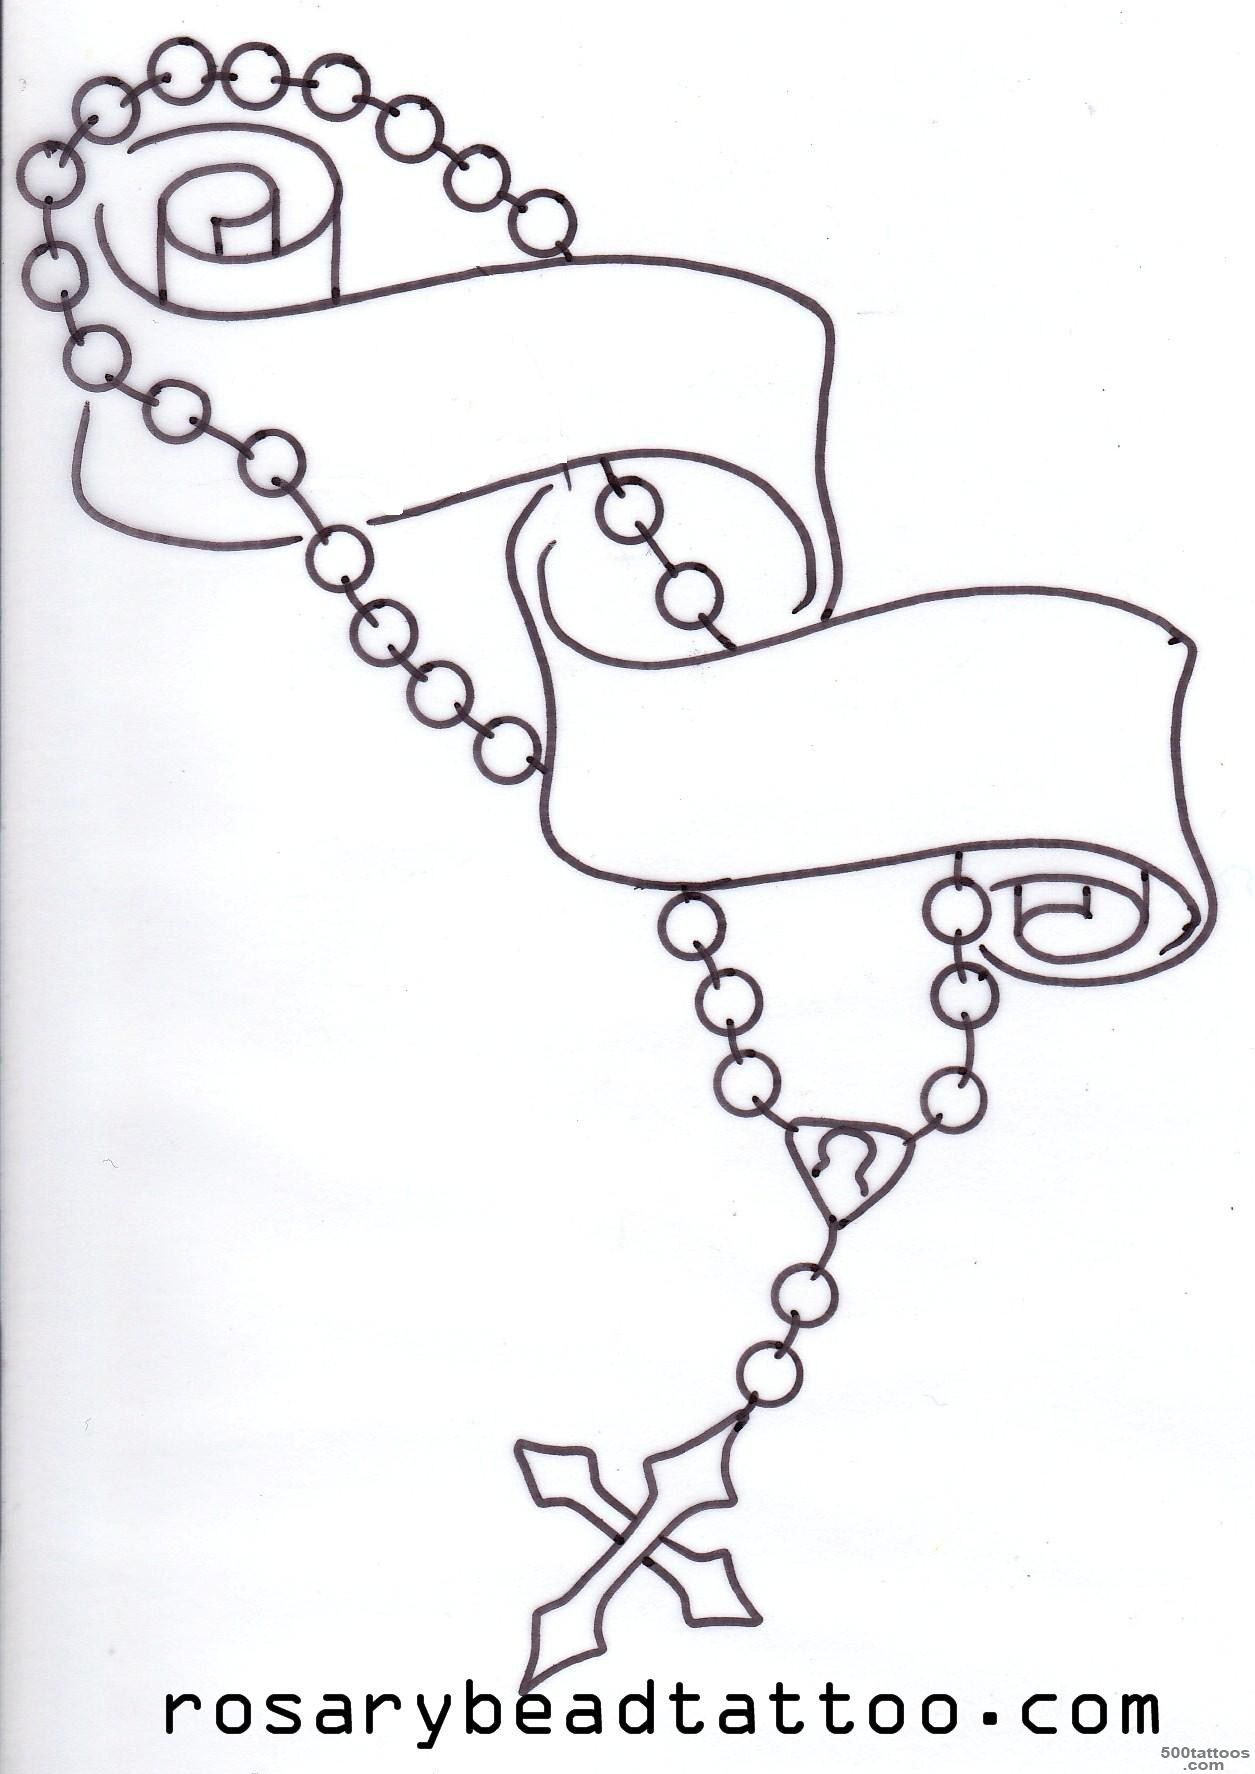 5 Rosary Tattoo Designs, Samples And Ideas_31